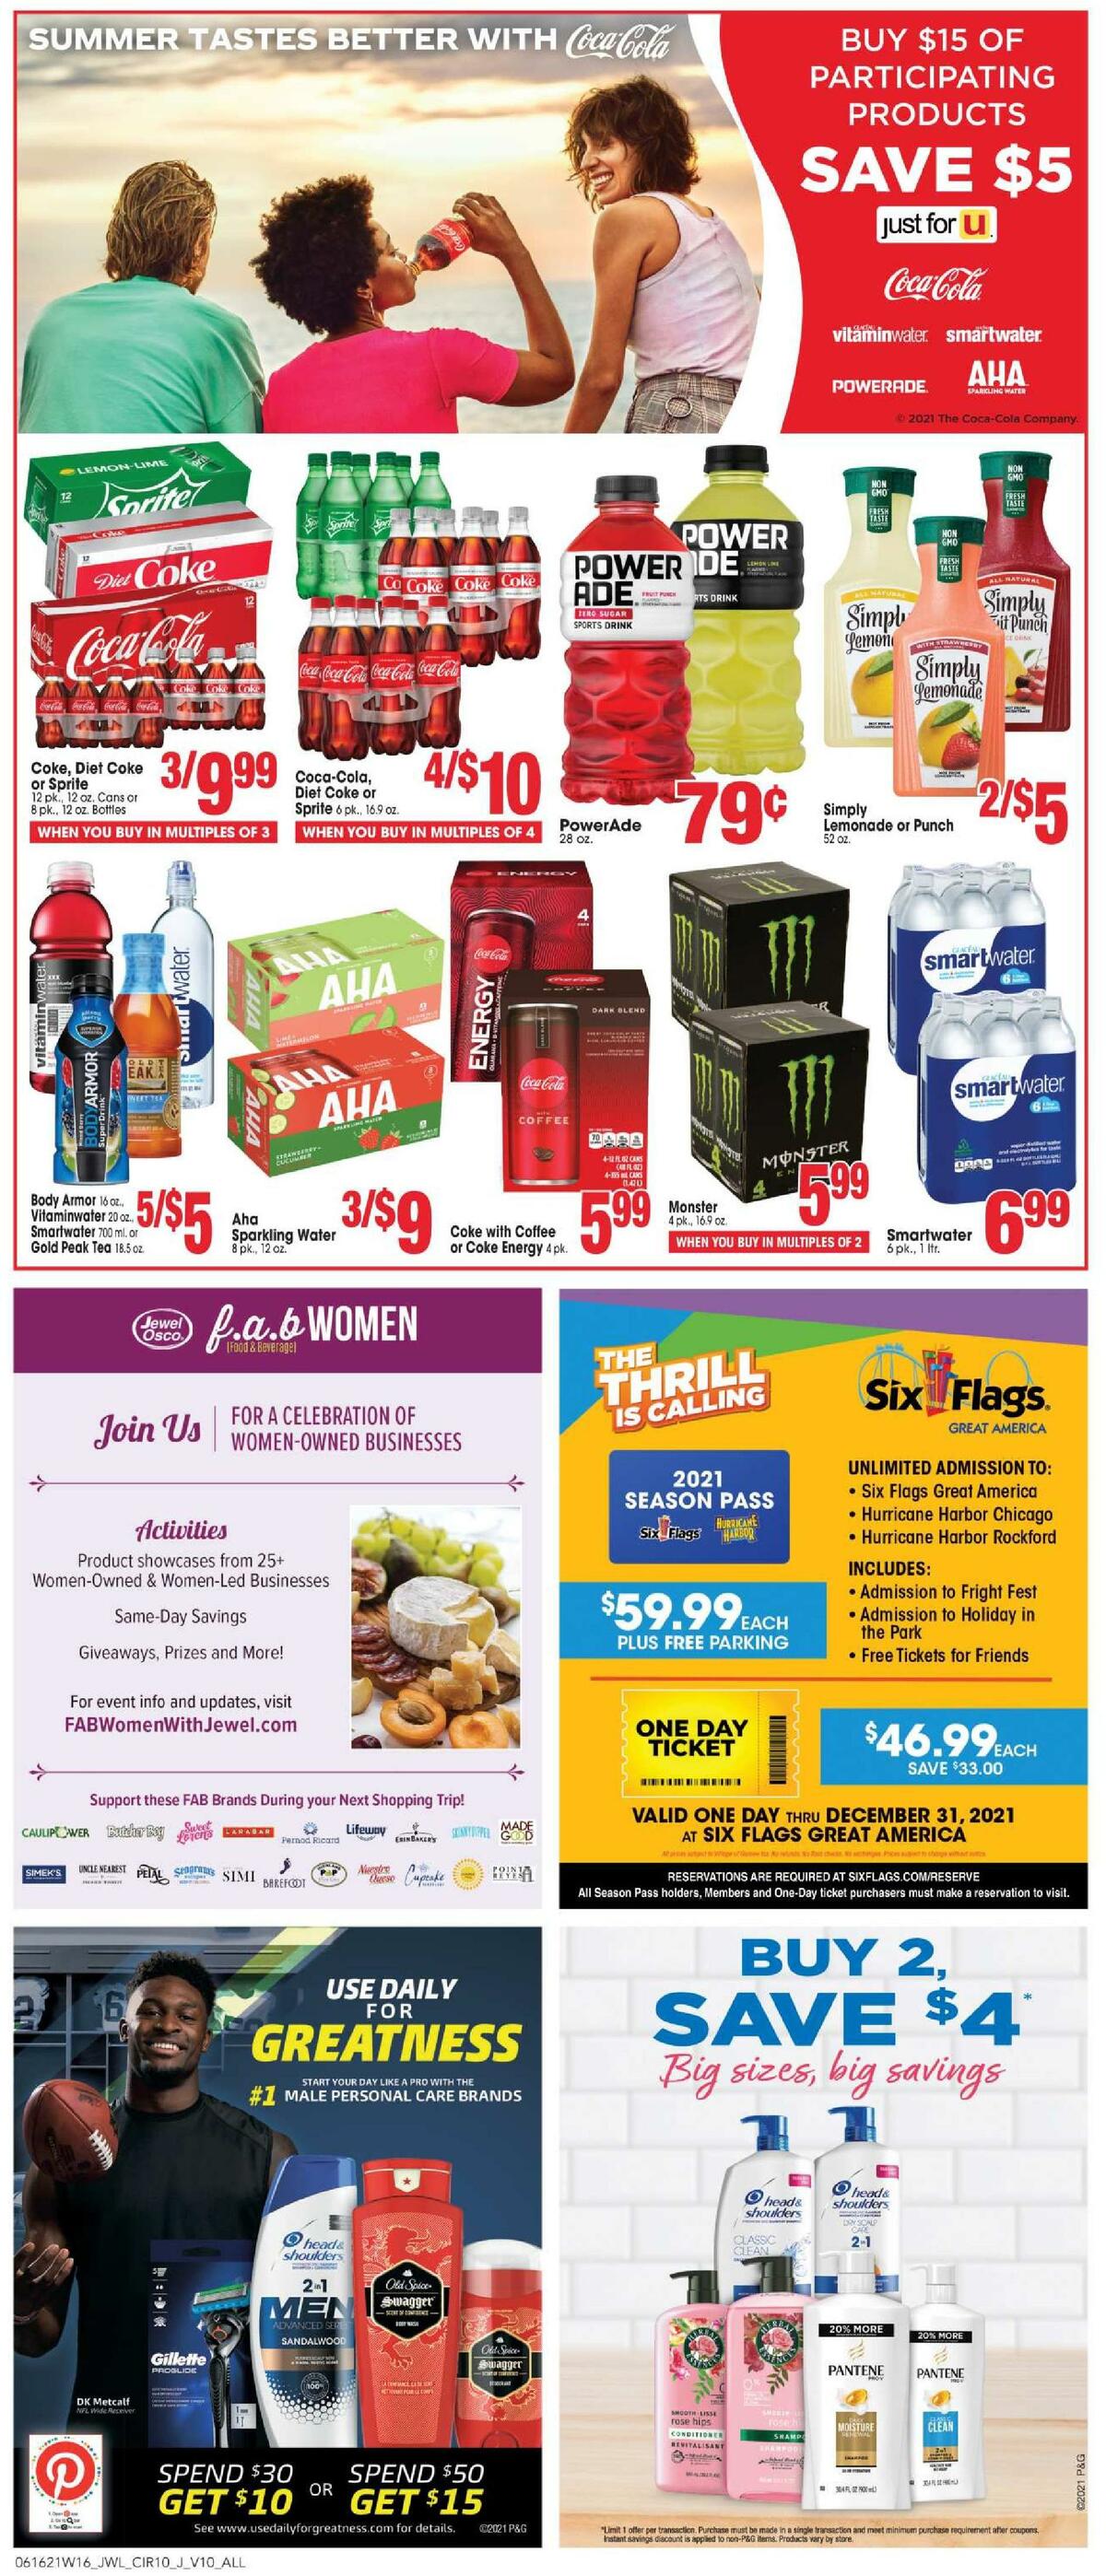 Jewel Osco Weekly Ad from June 16